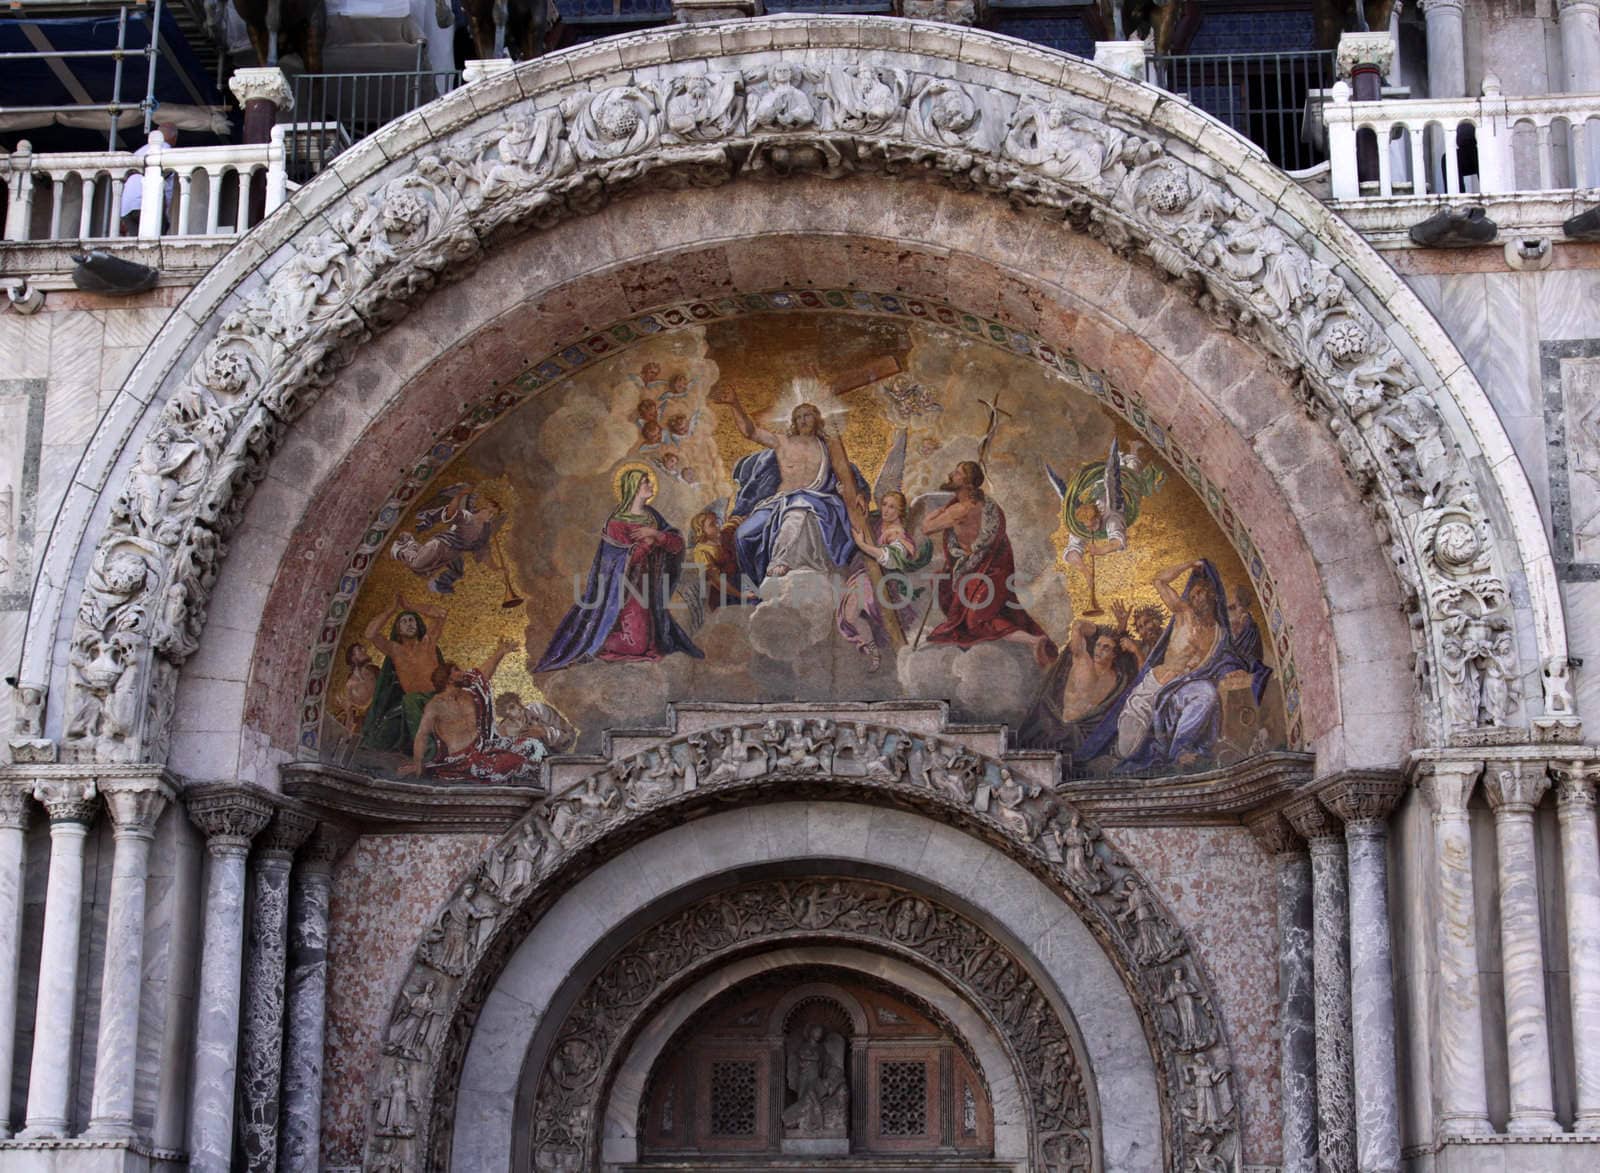 The gorgeous mosaic featuring Jesus and the cross, above the entrance to St. Mark's basilica.
